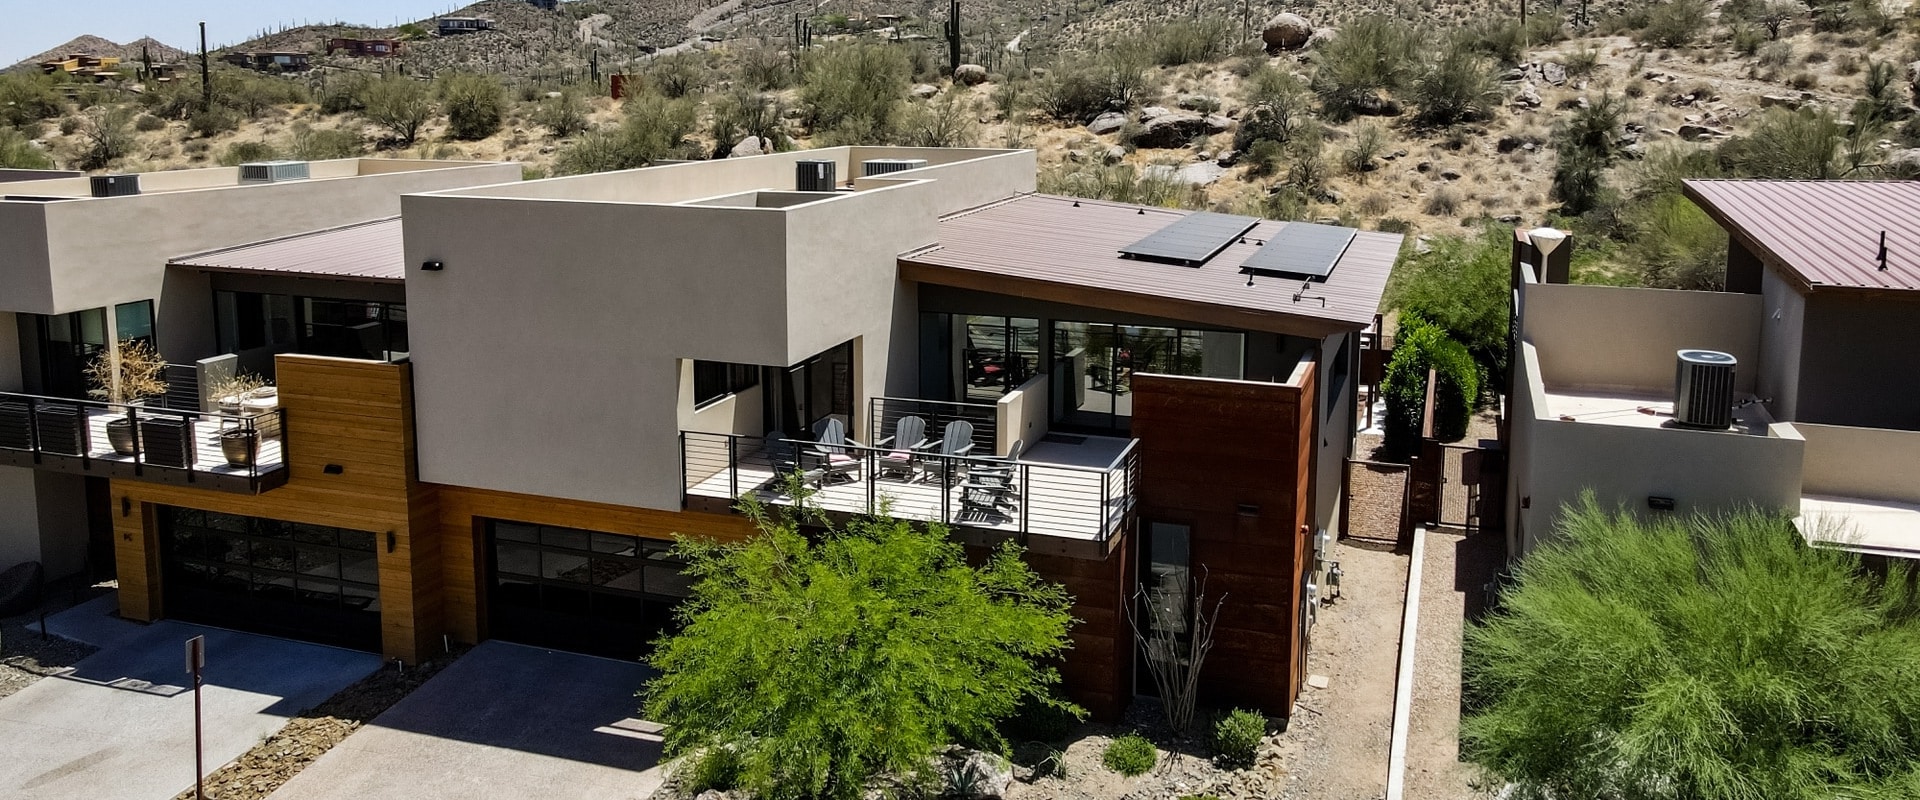 Efficient Use of Space: Creating an Eco-Friendly and Energy-Efficient Home